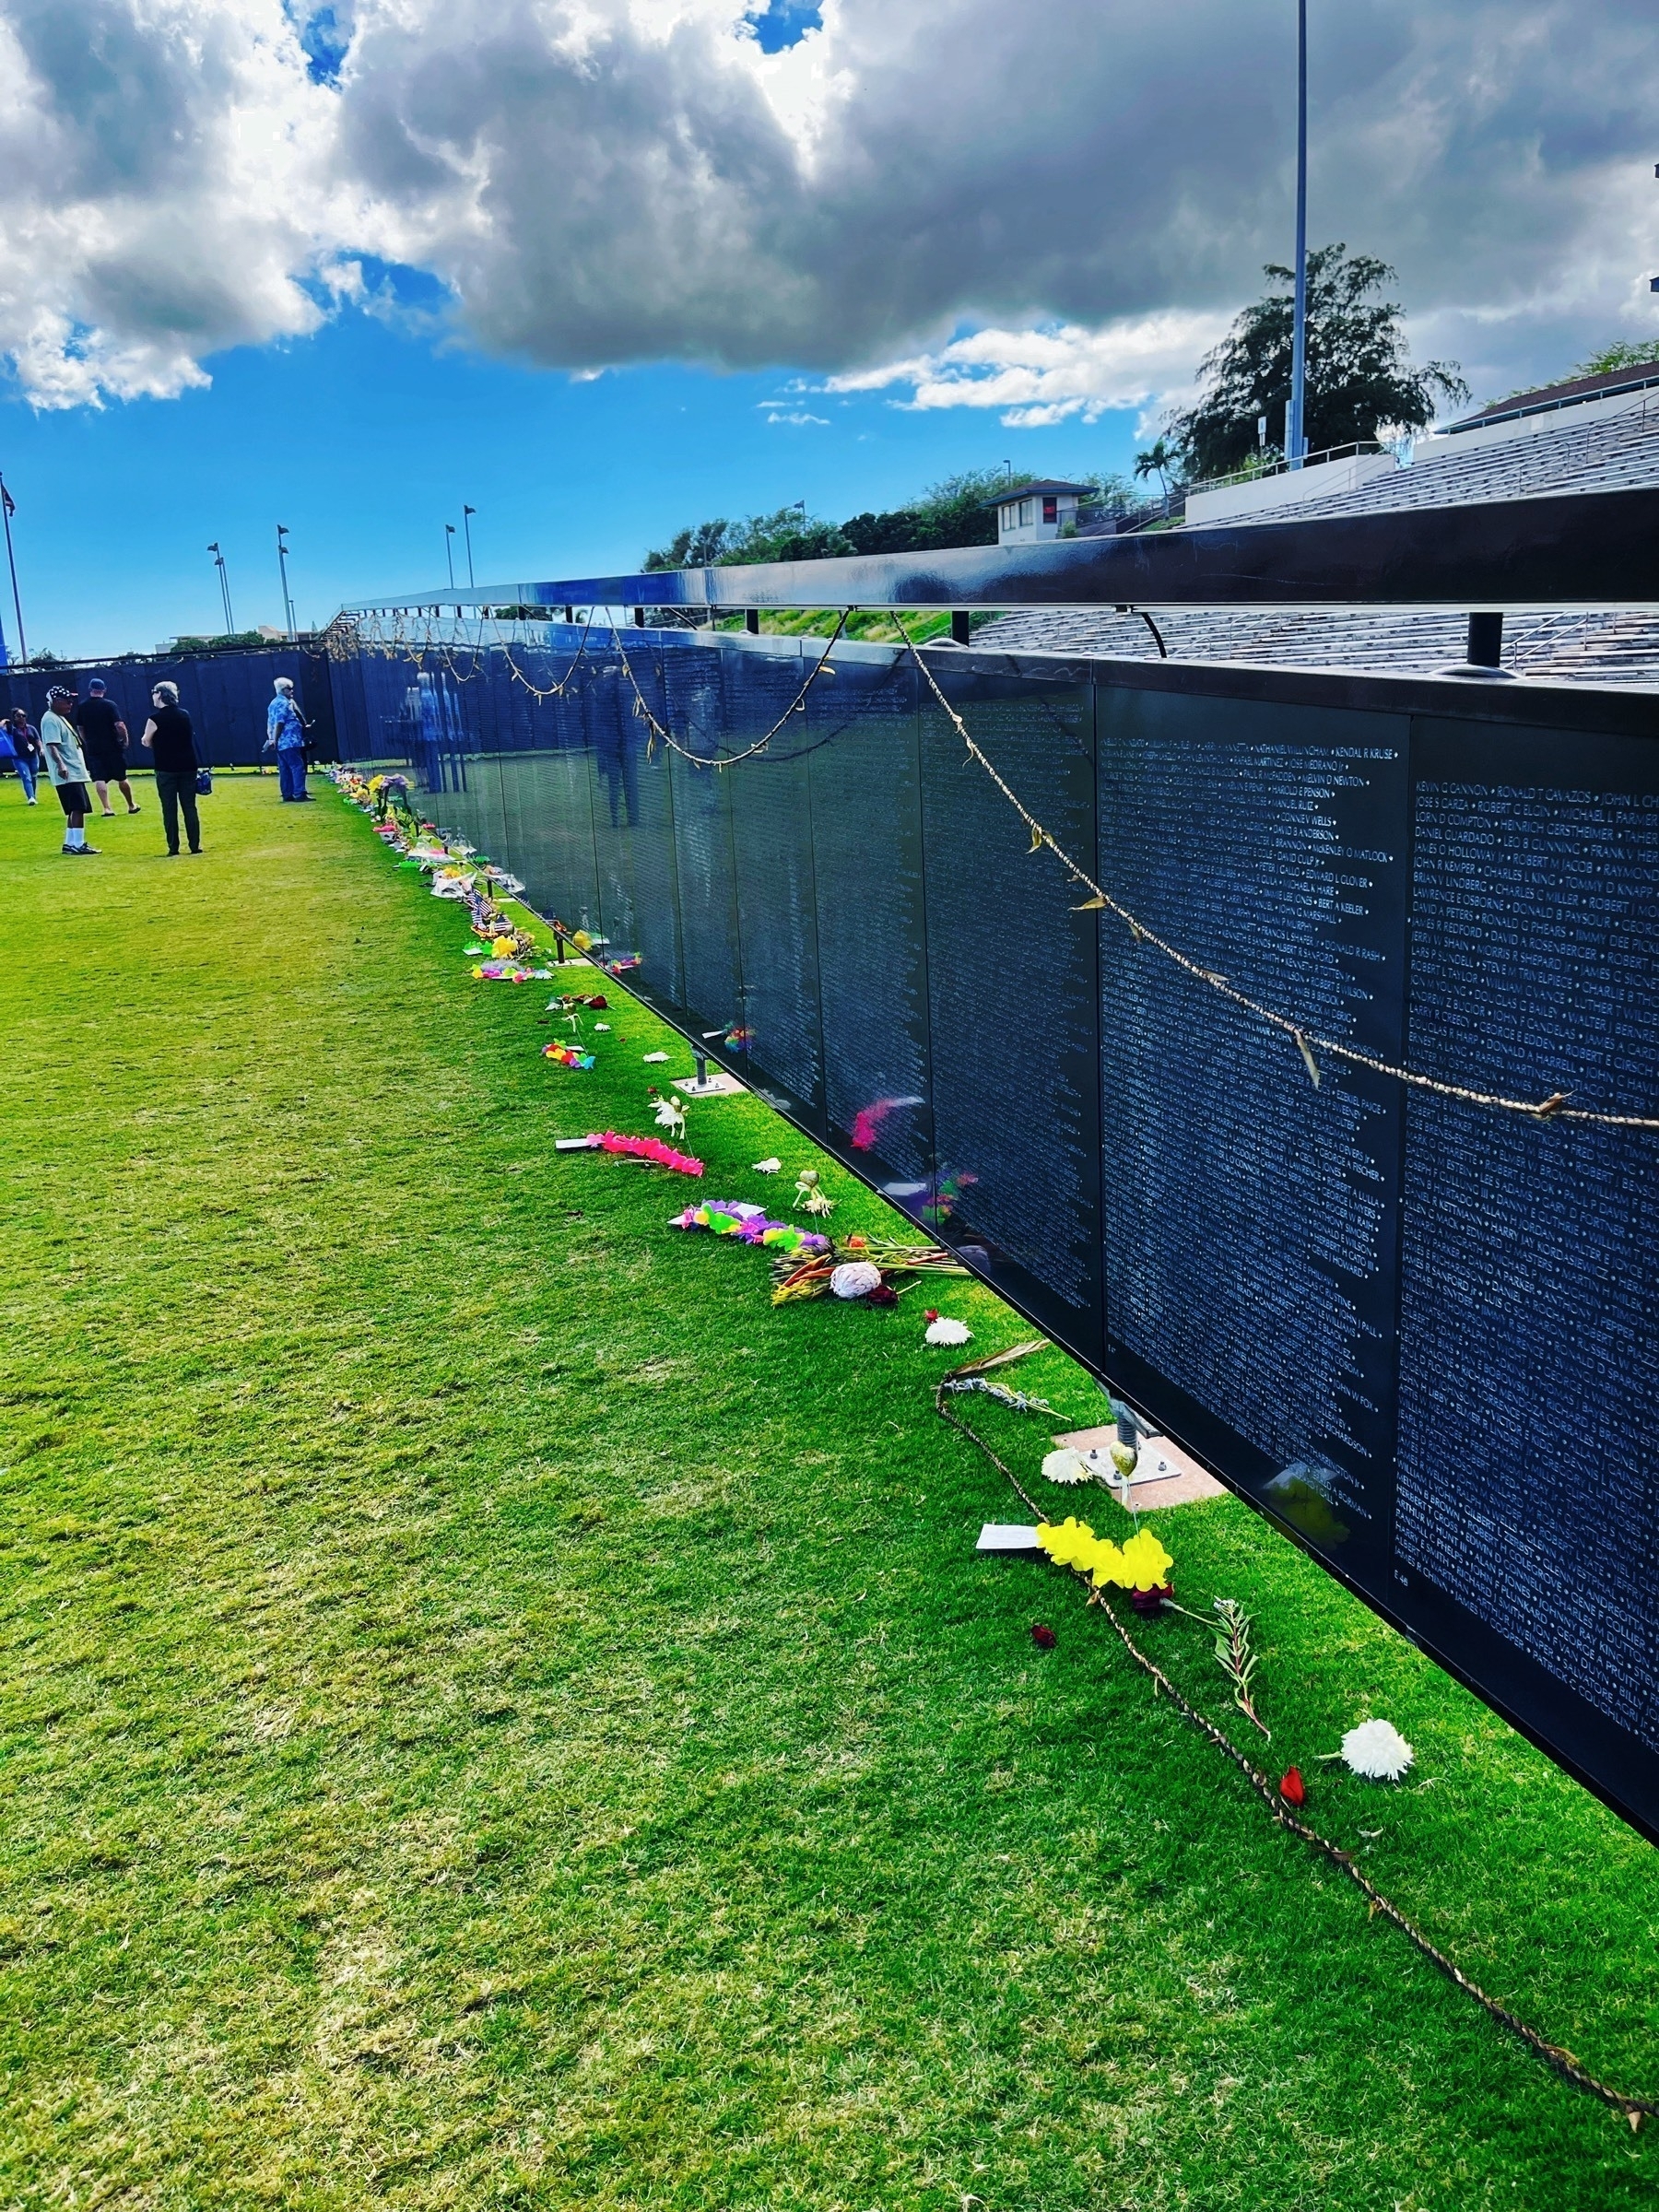 A wall standing on grass with names on it extends to the distance. Leis are draped over it, flower offerings on the grass and people in the background